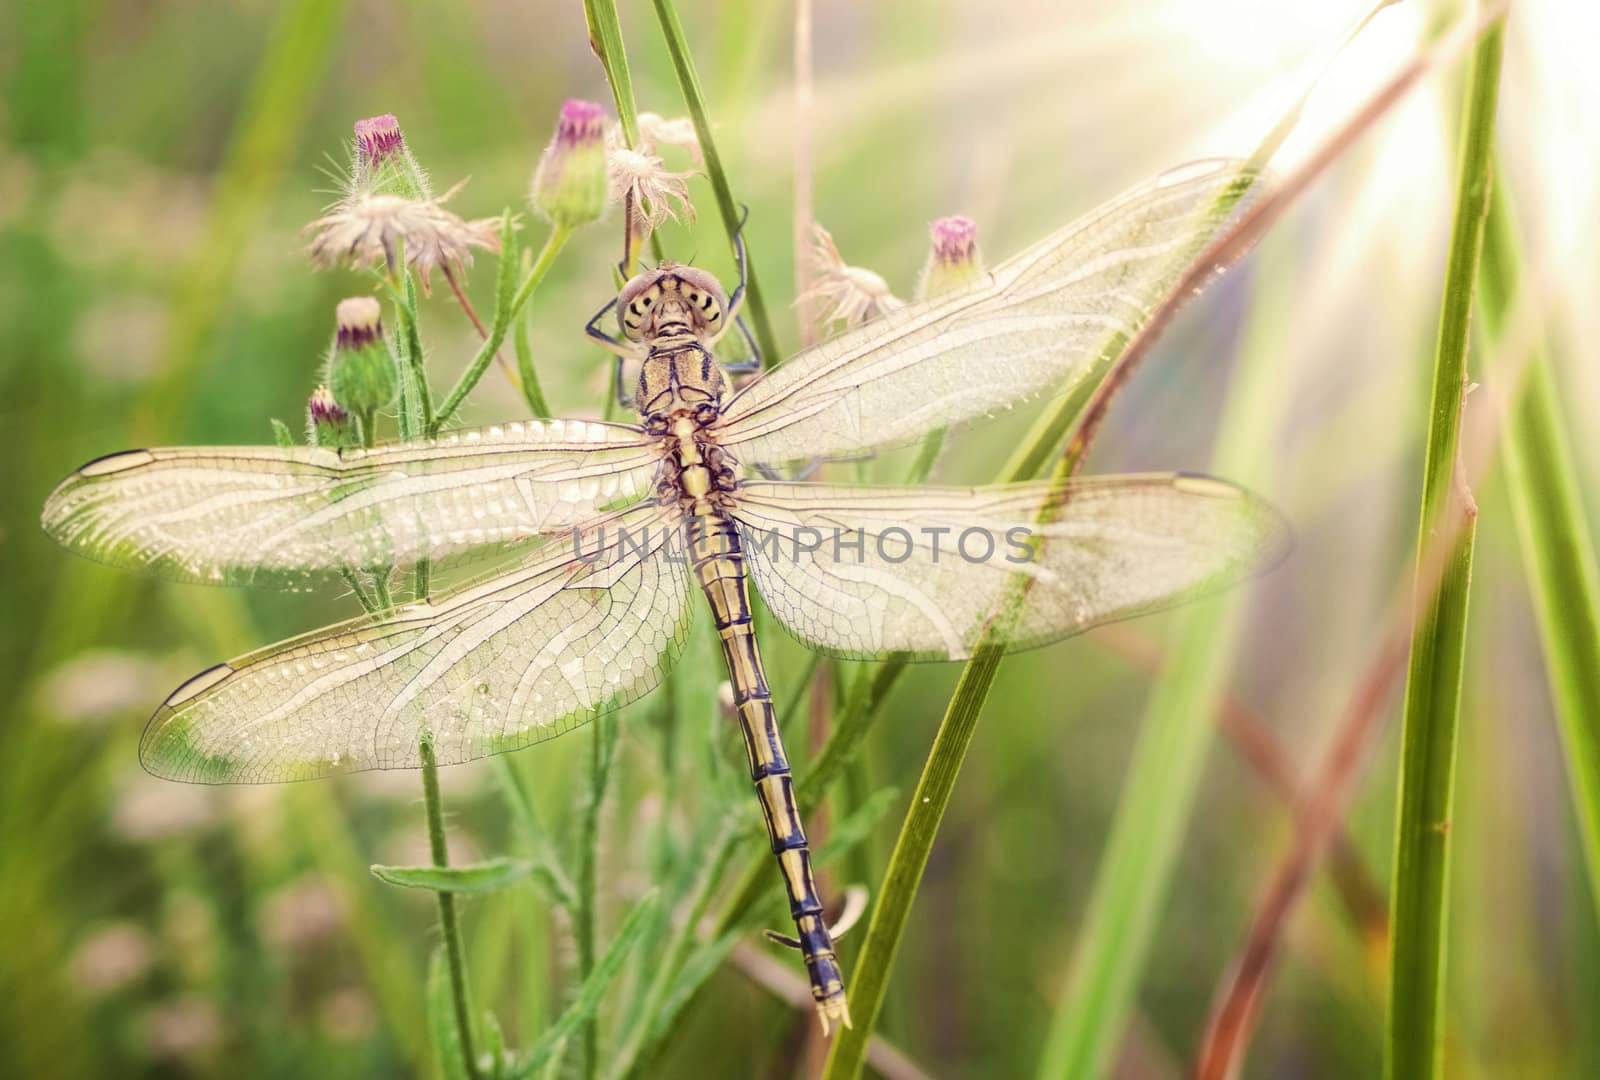 beautiful image of a young newly hatched dragonfly